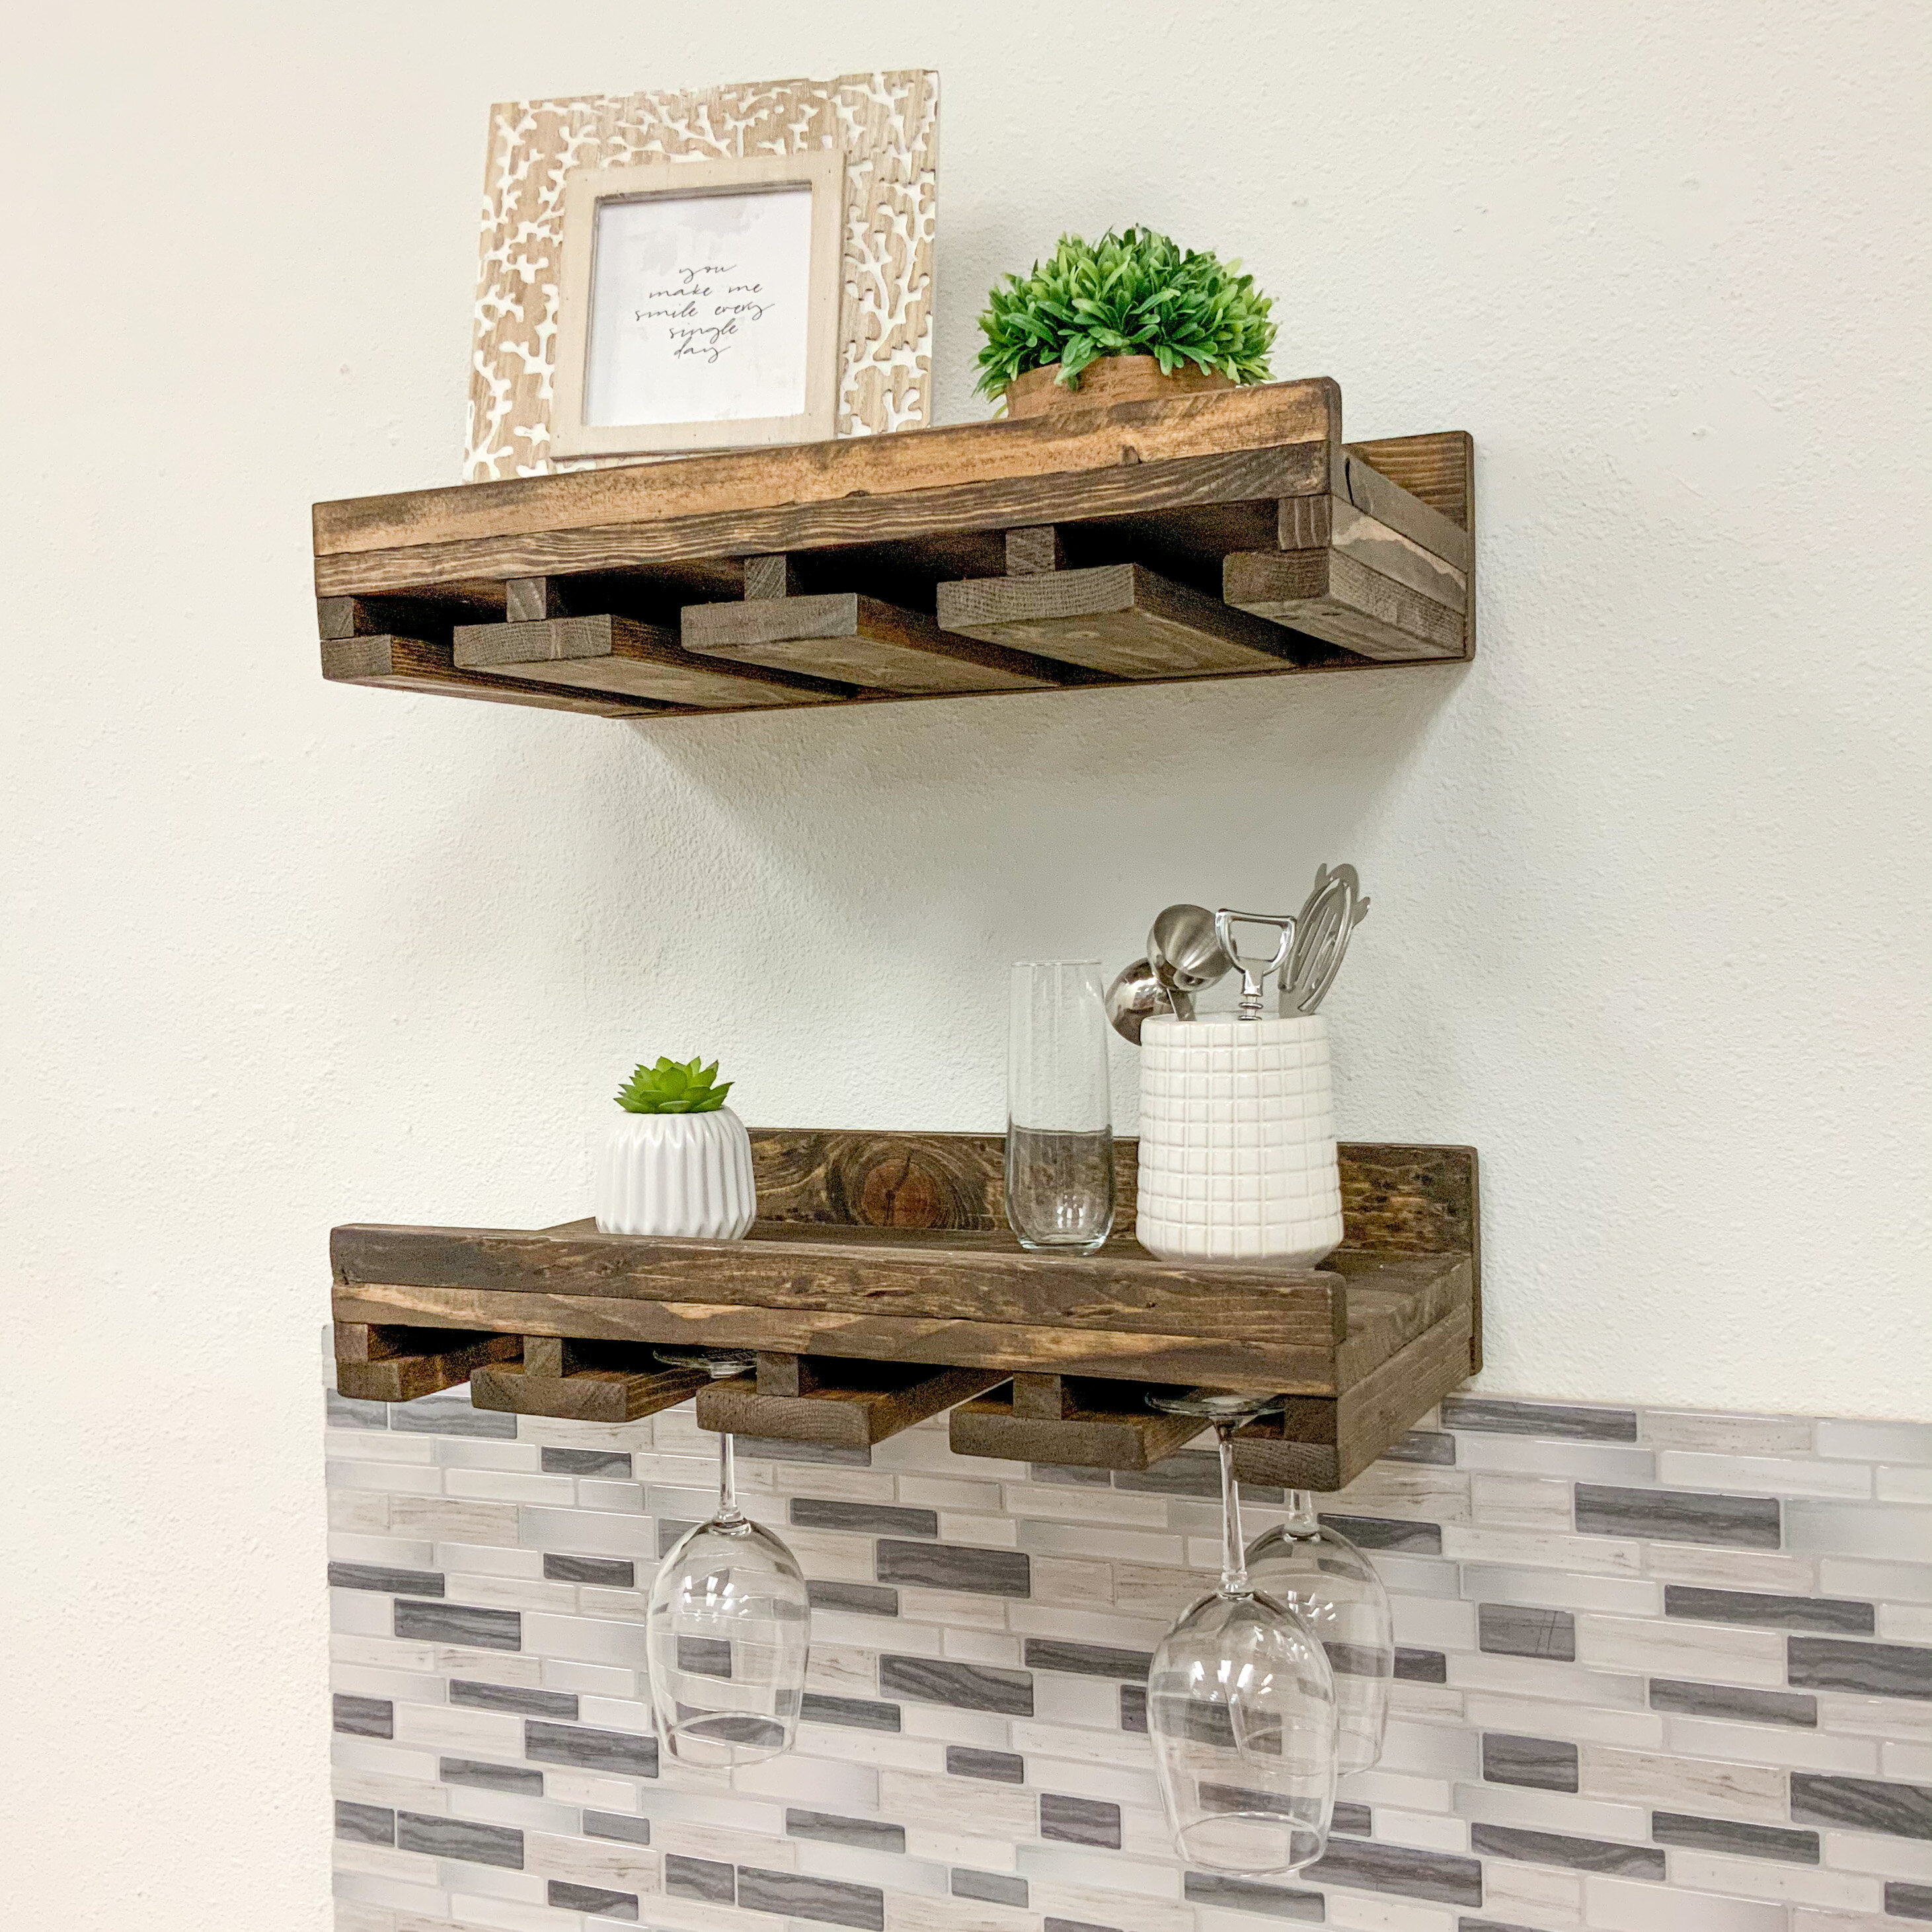 Union RusticSolid Wood Wall Mounted Wine Glass Rack & Reviews